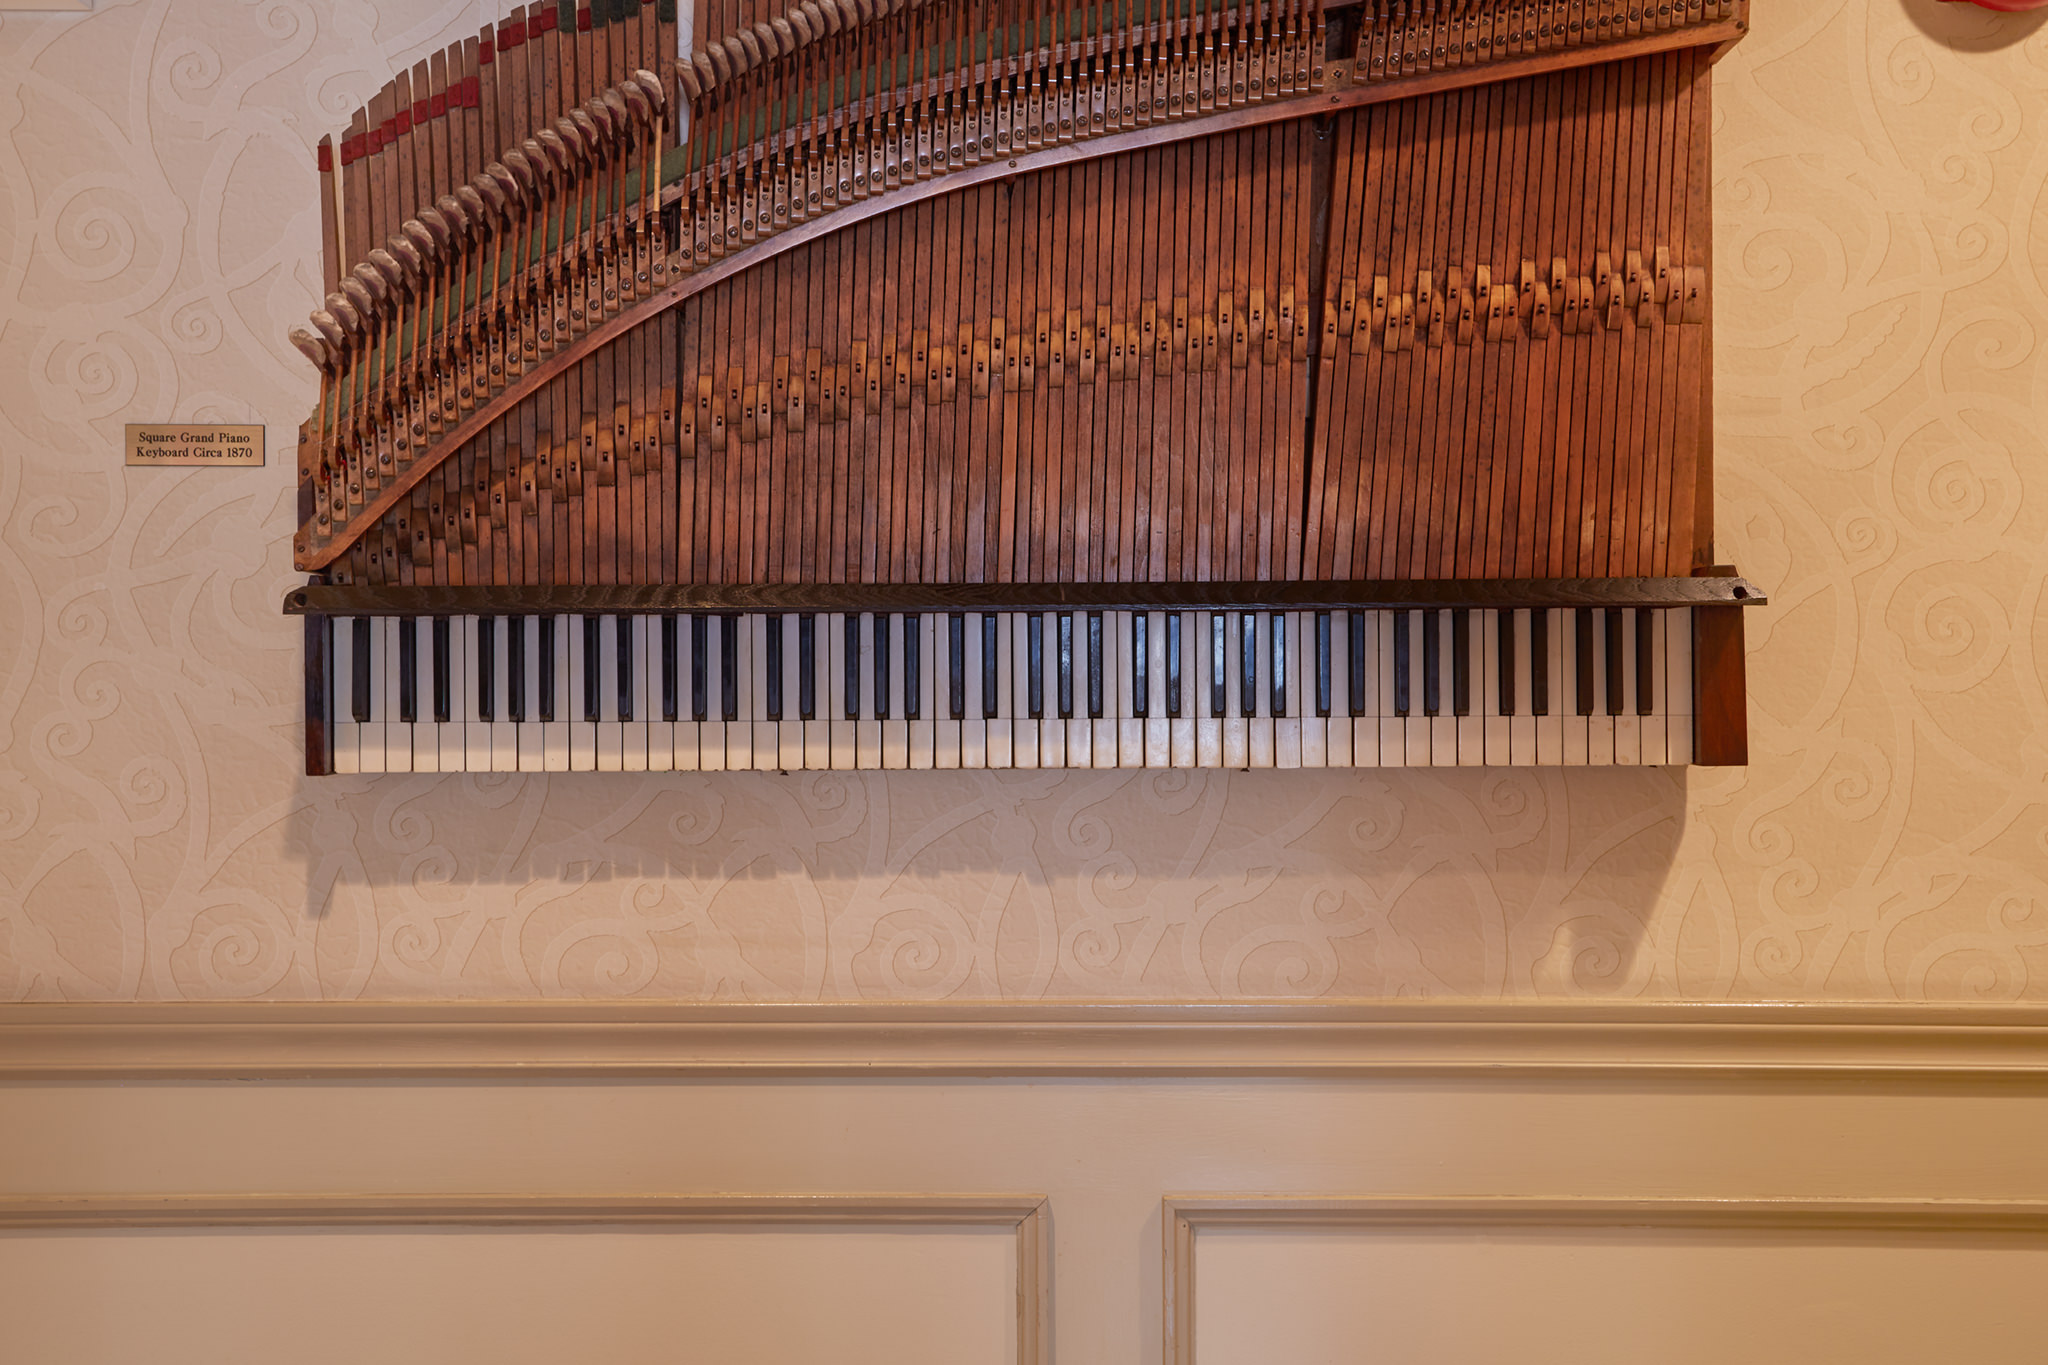 1 of 6 Pieces of 1870 Square Grand Piano That Adorn the Lobby Walls